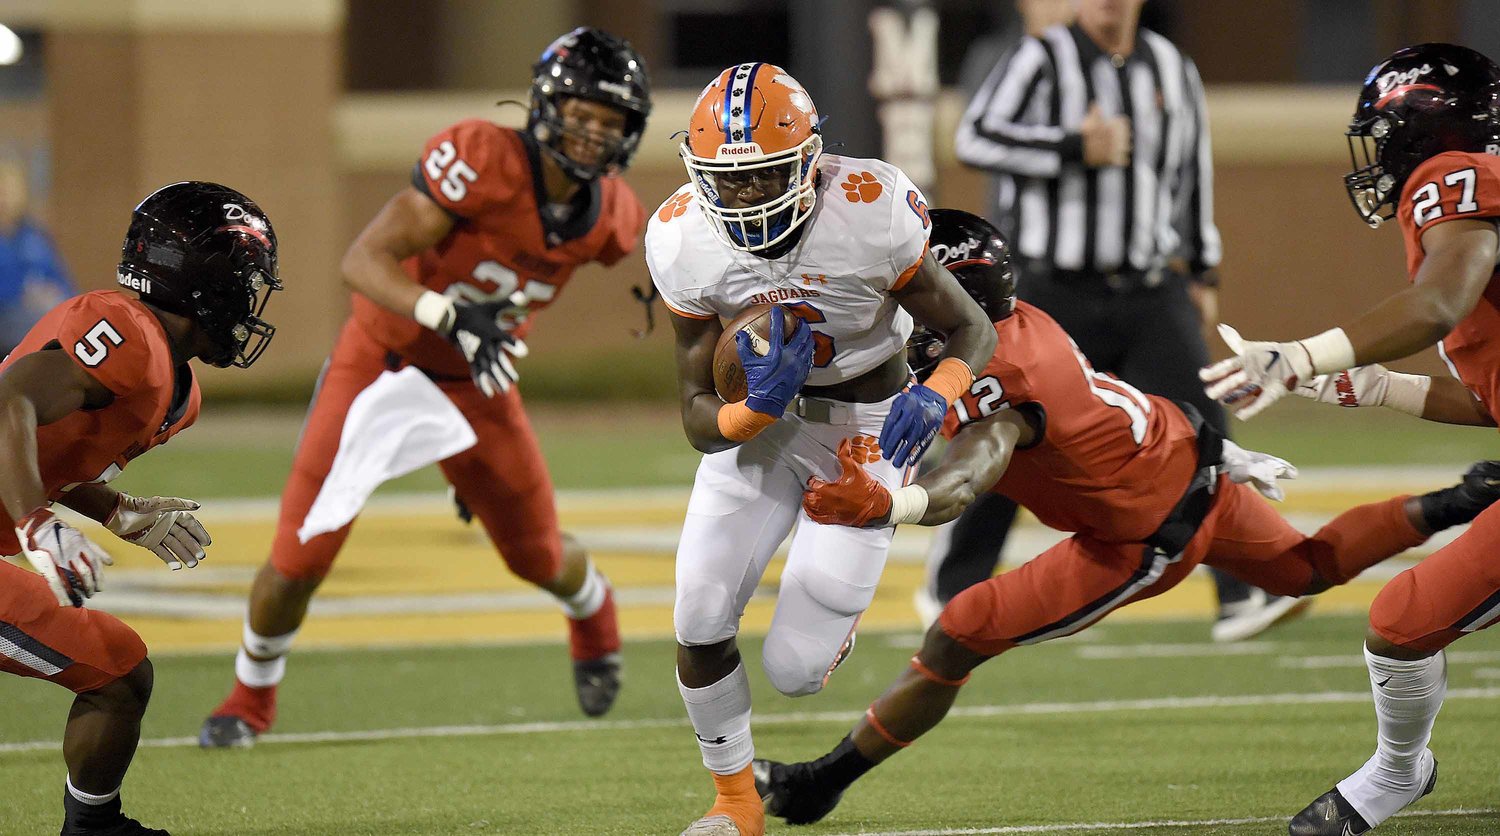 Madison Central's Broderick Washington (6) runs against Brandon in the MHSAA Class 6A Football State Championship game.